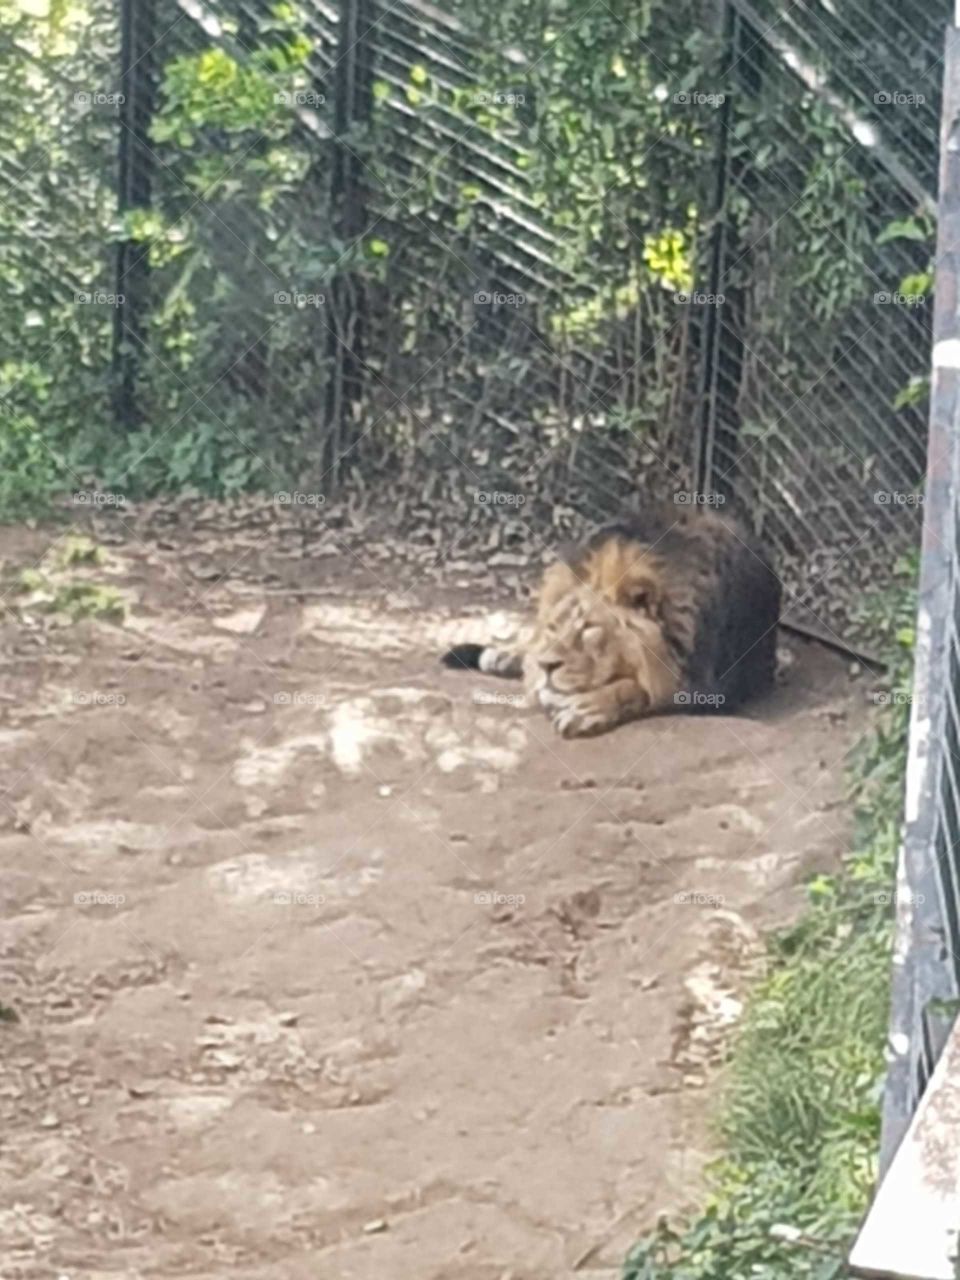 just a lion taking a nap